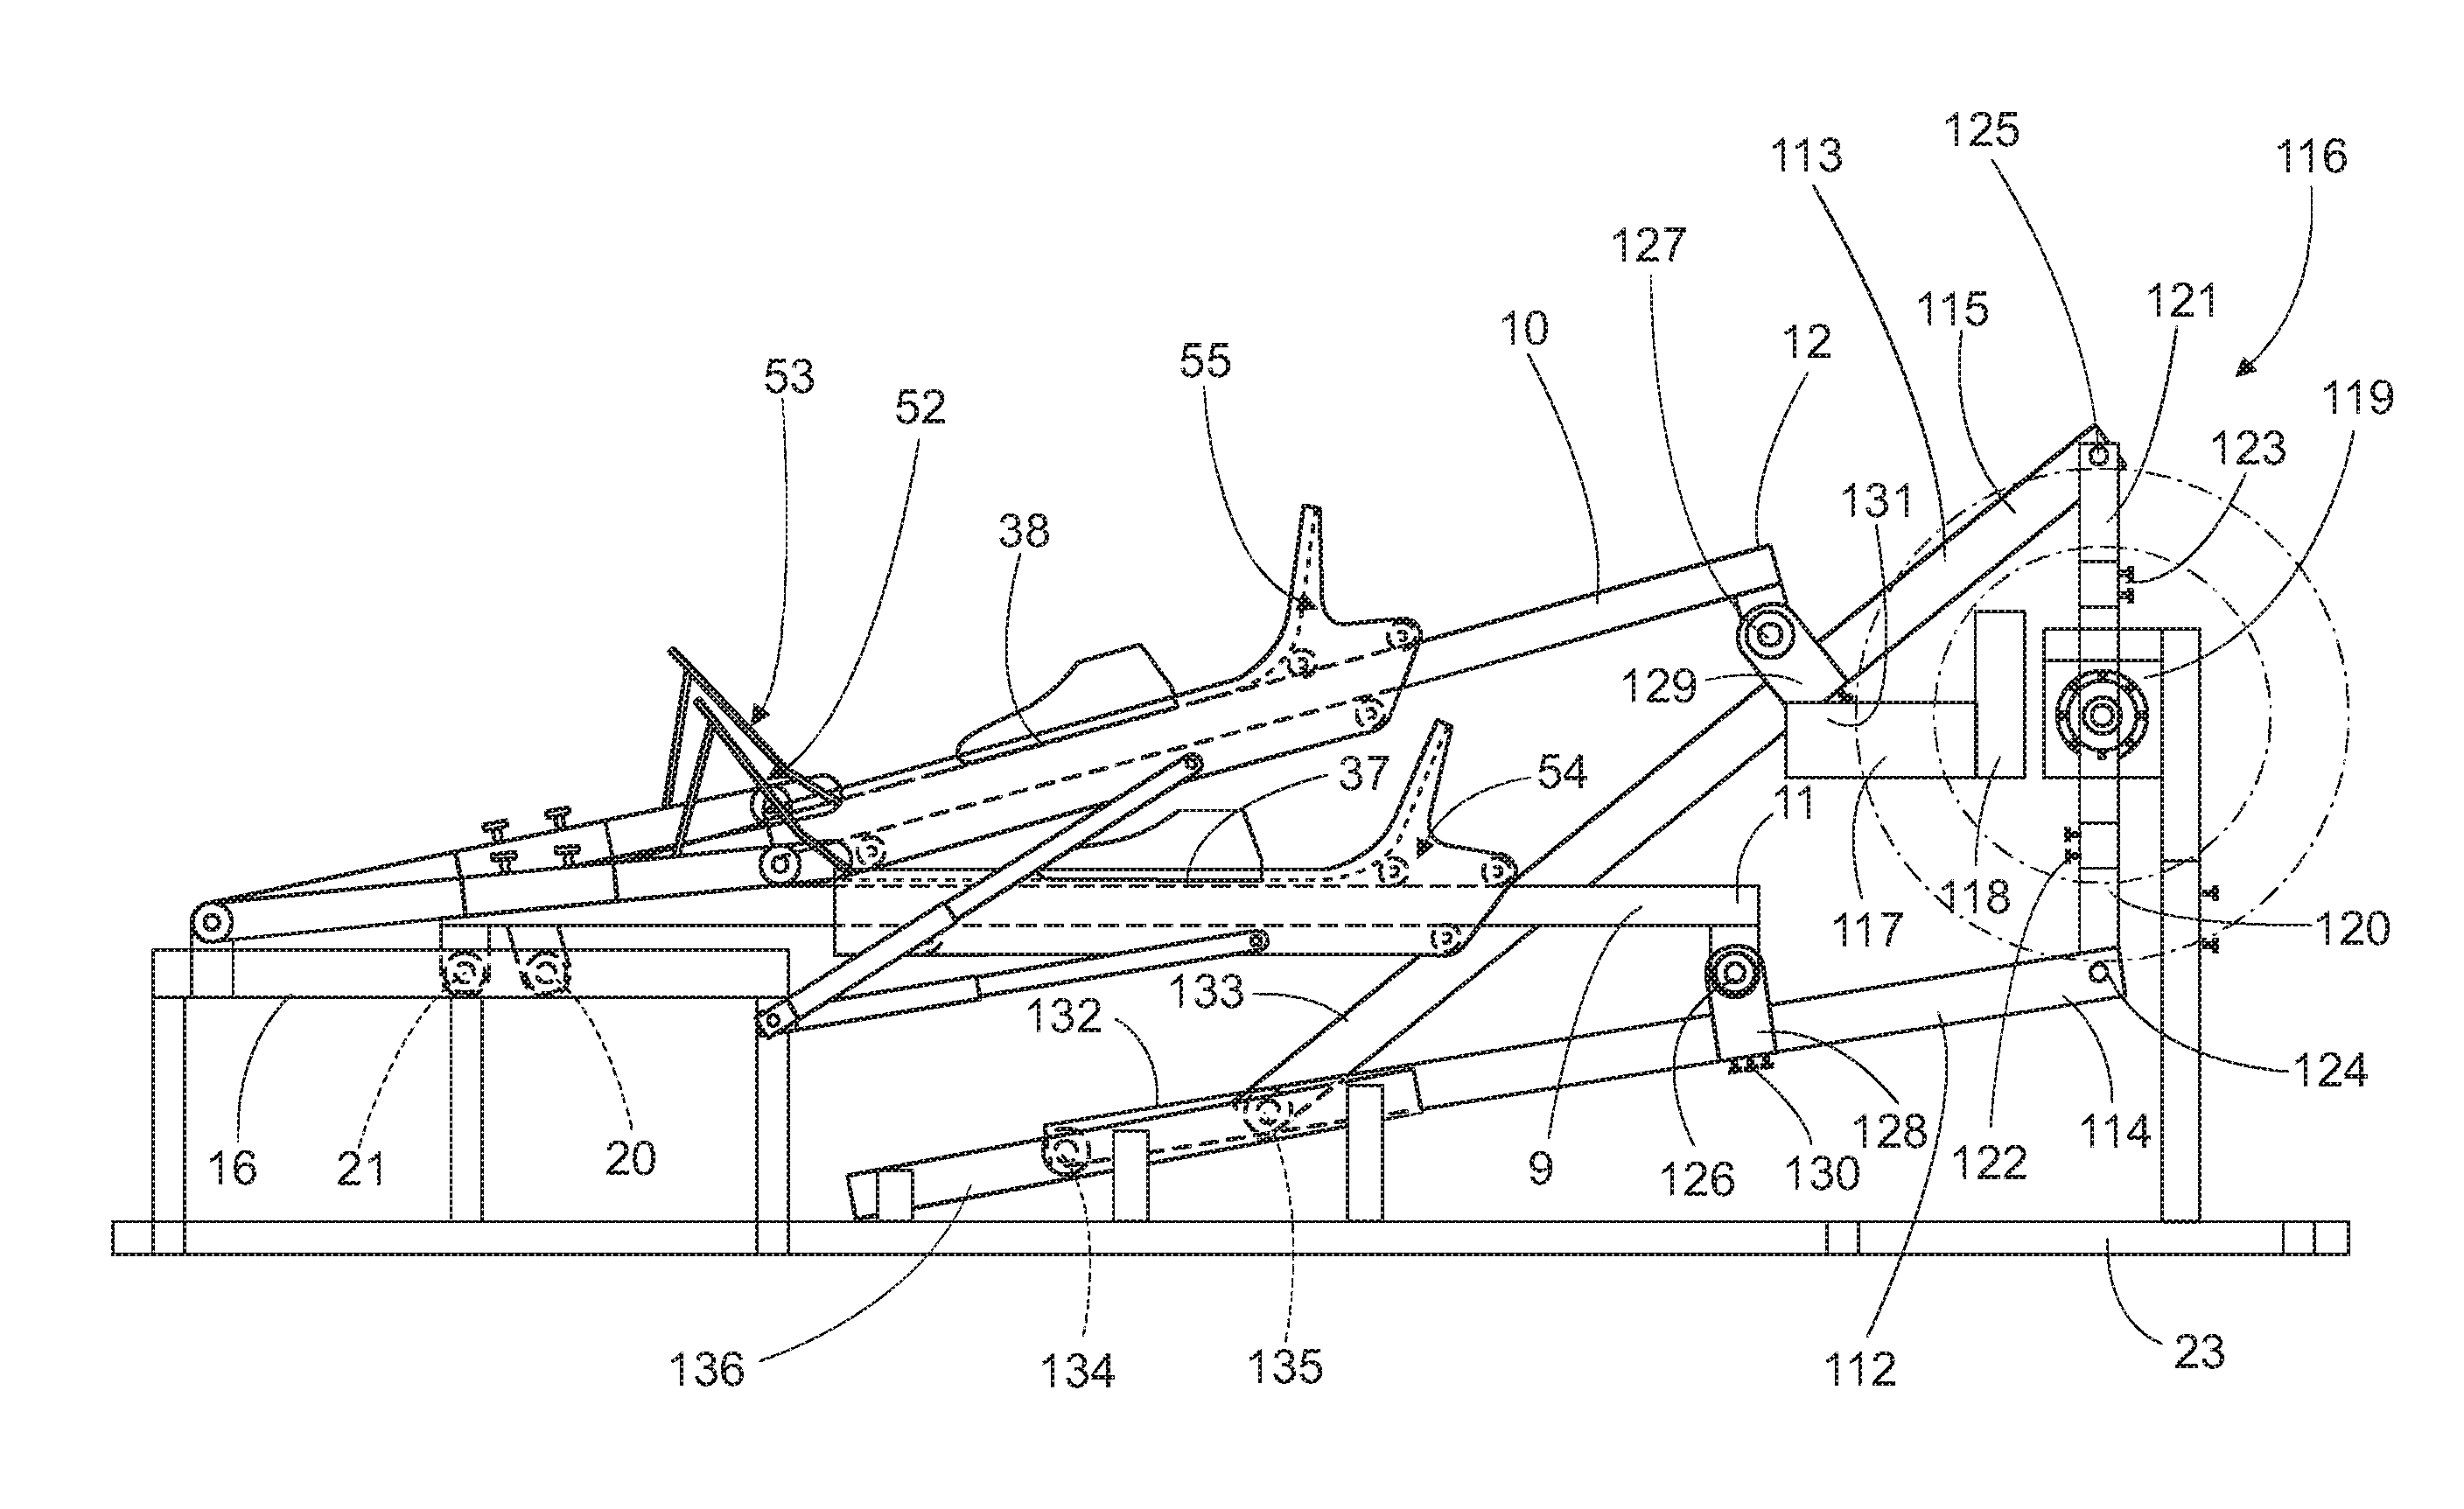 Apparatus for rehabilitation of patients suffering motor dysfunction